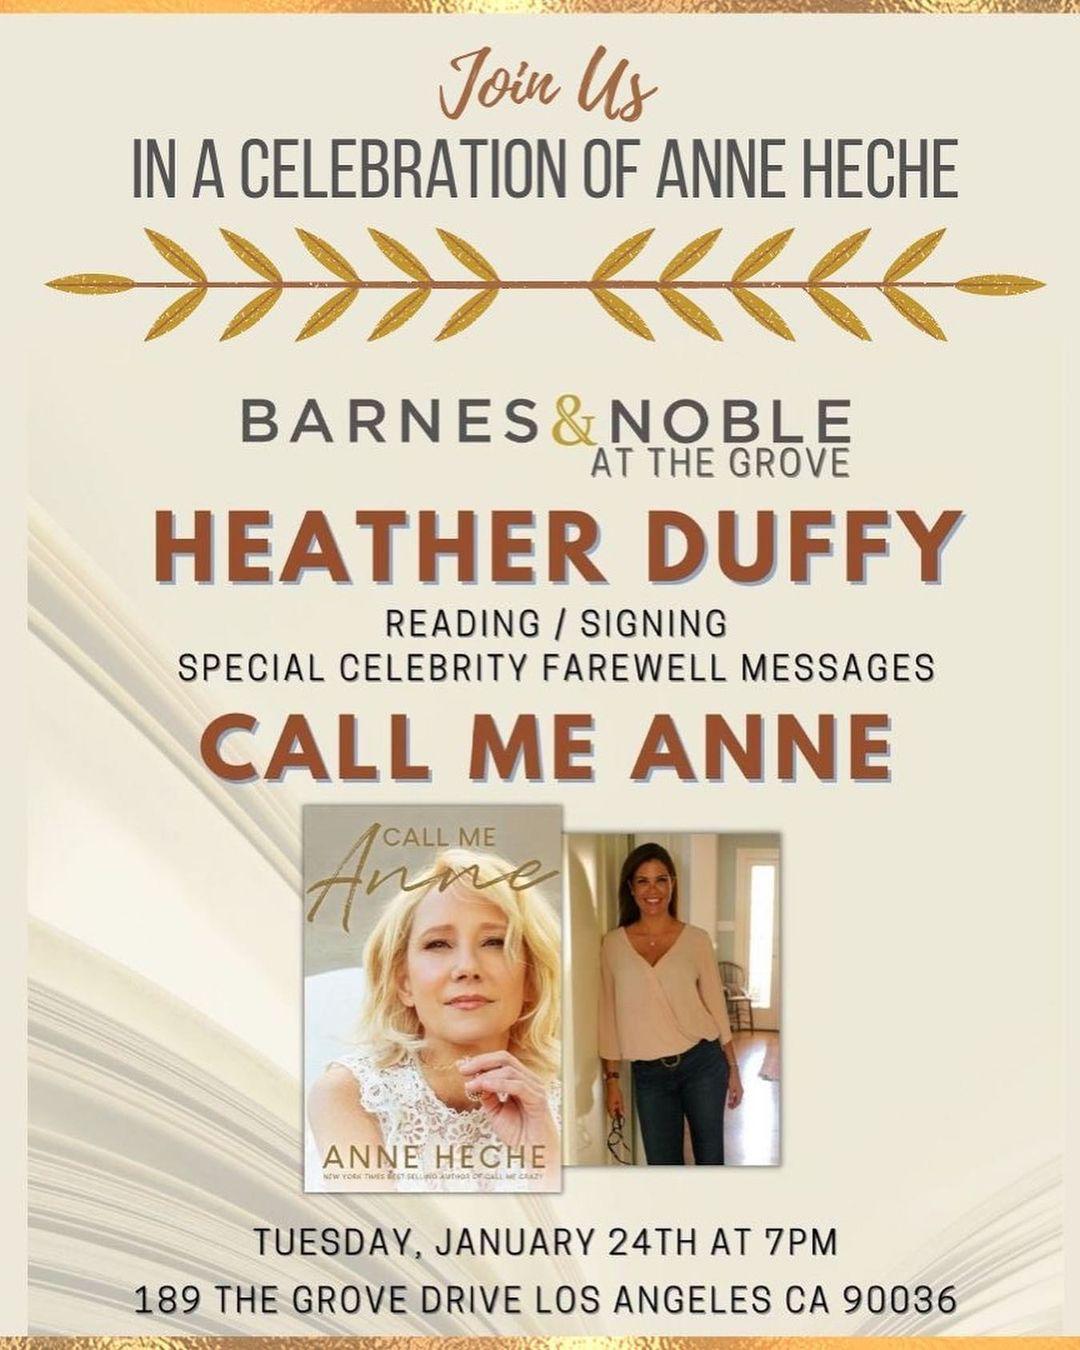 Homer Heche Laffoon Set To Debut Anne Heche's Latest Memoir Posthumously after taking charge of her Instagram account